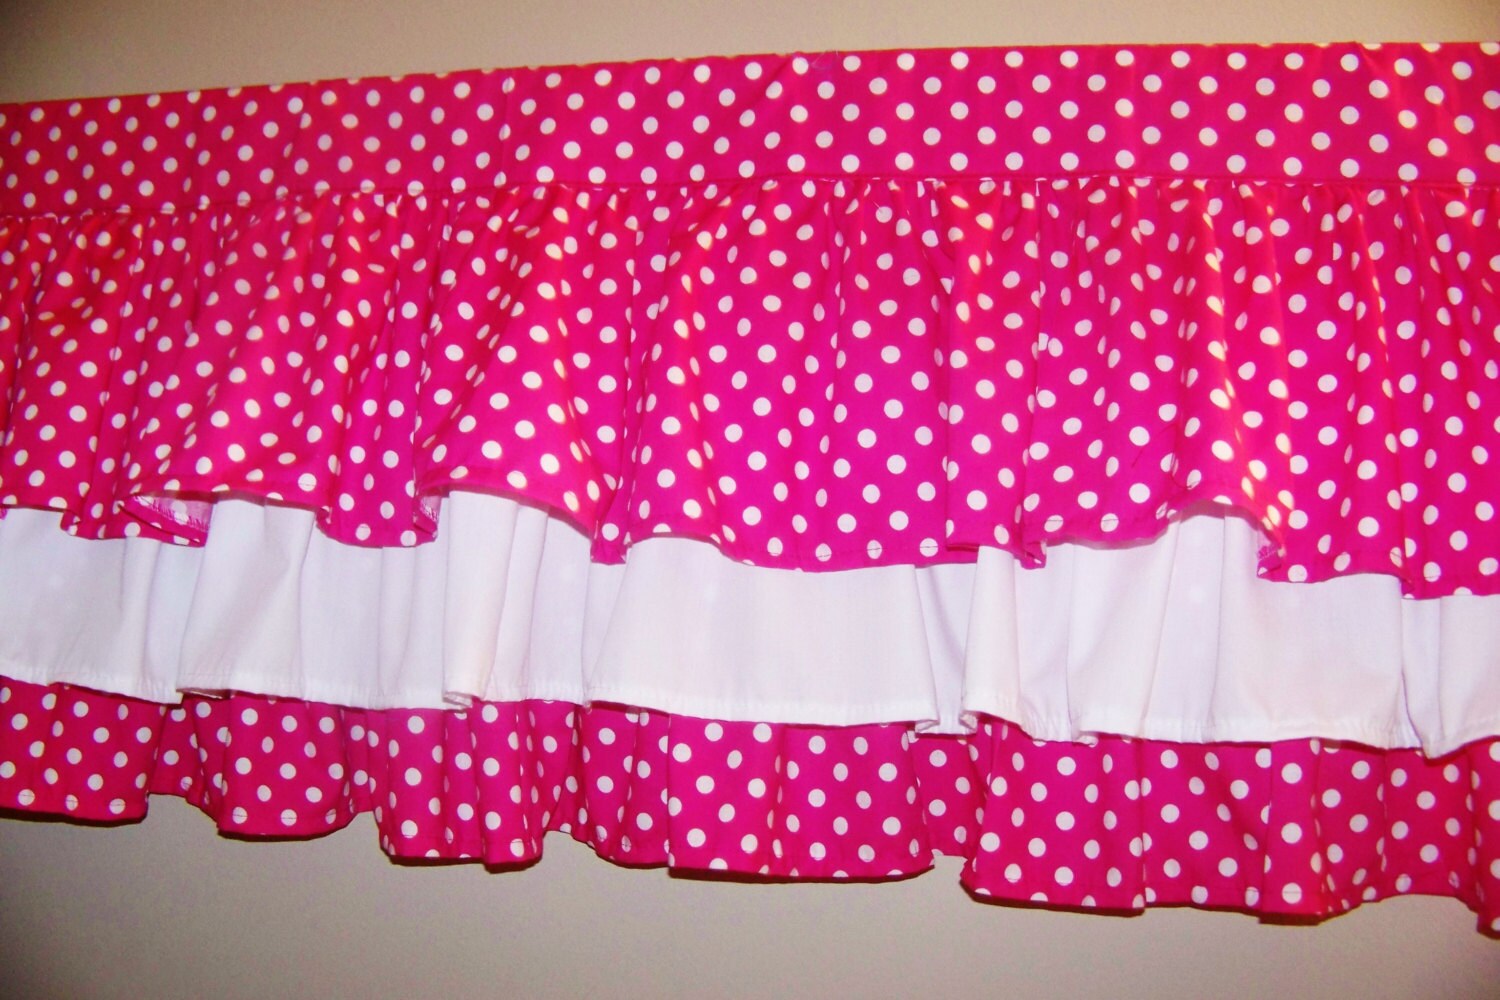 PINK POLKA DOT Tiers Valance 3 Tiers 42 x 16 inches Pink and | Etsy